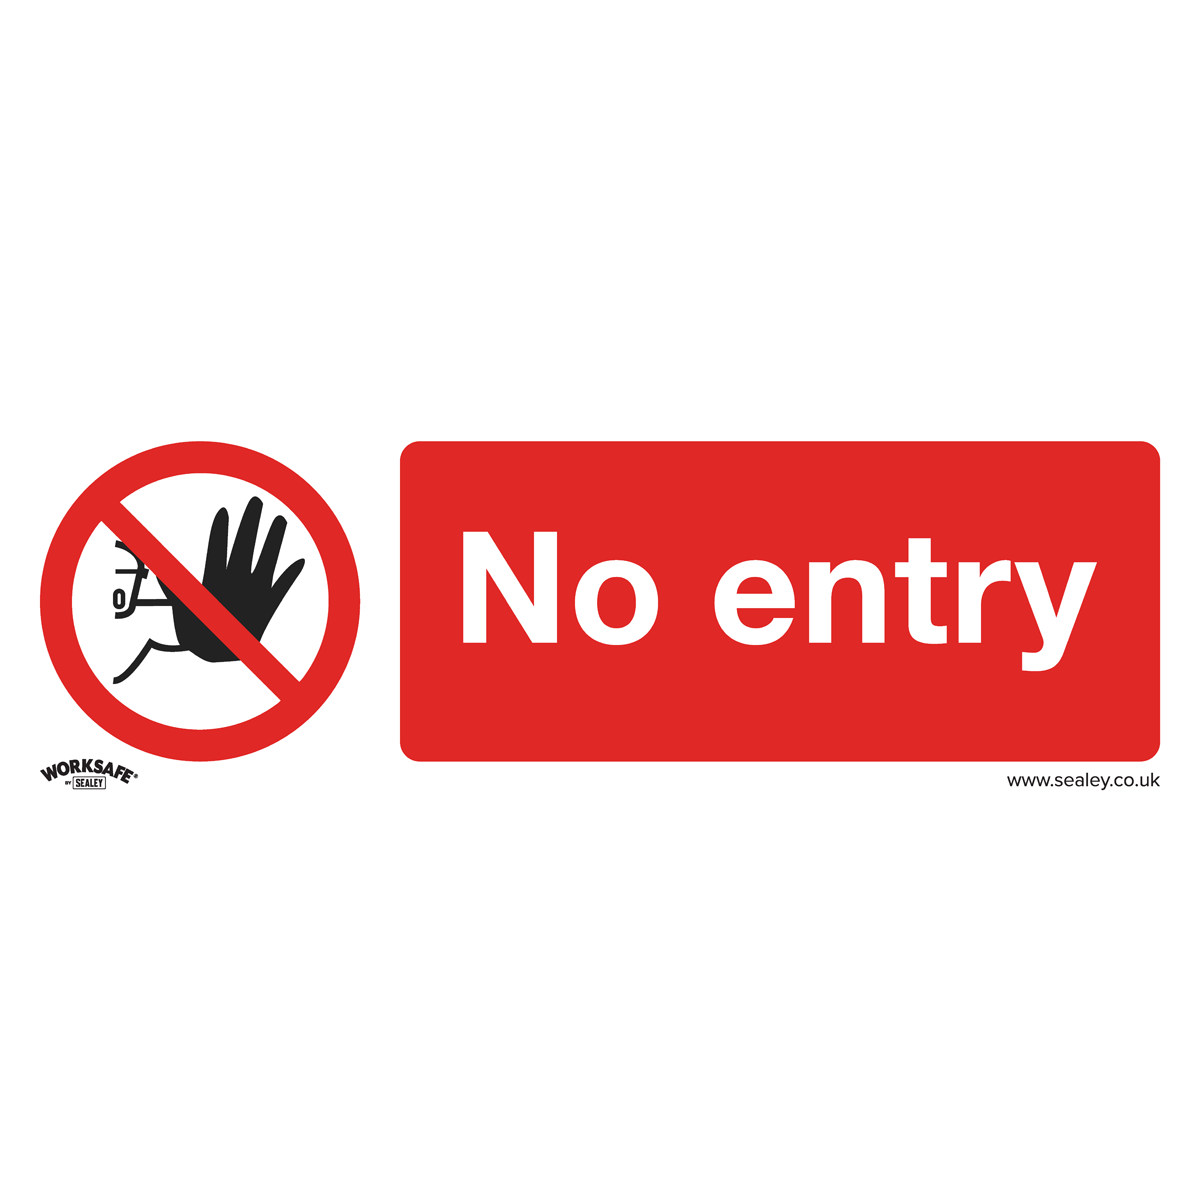 Sealey Prohibition Safety Sign - No Entry - Rigid Plastic - Pack of 10